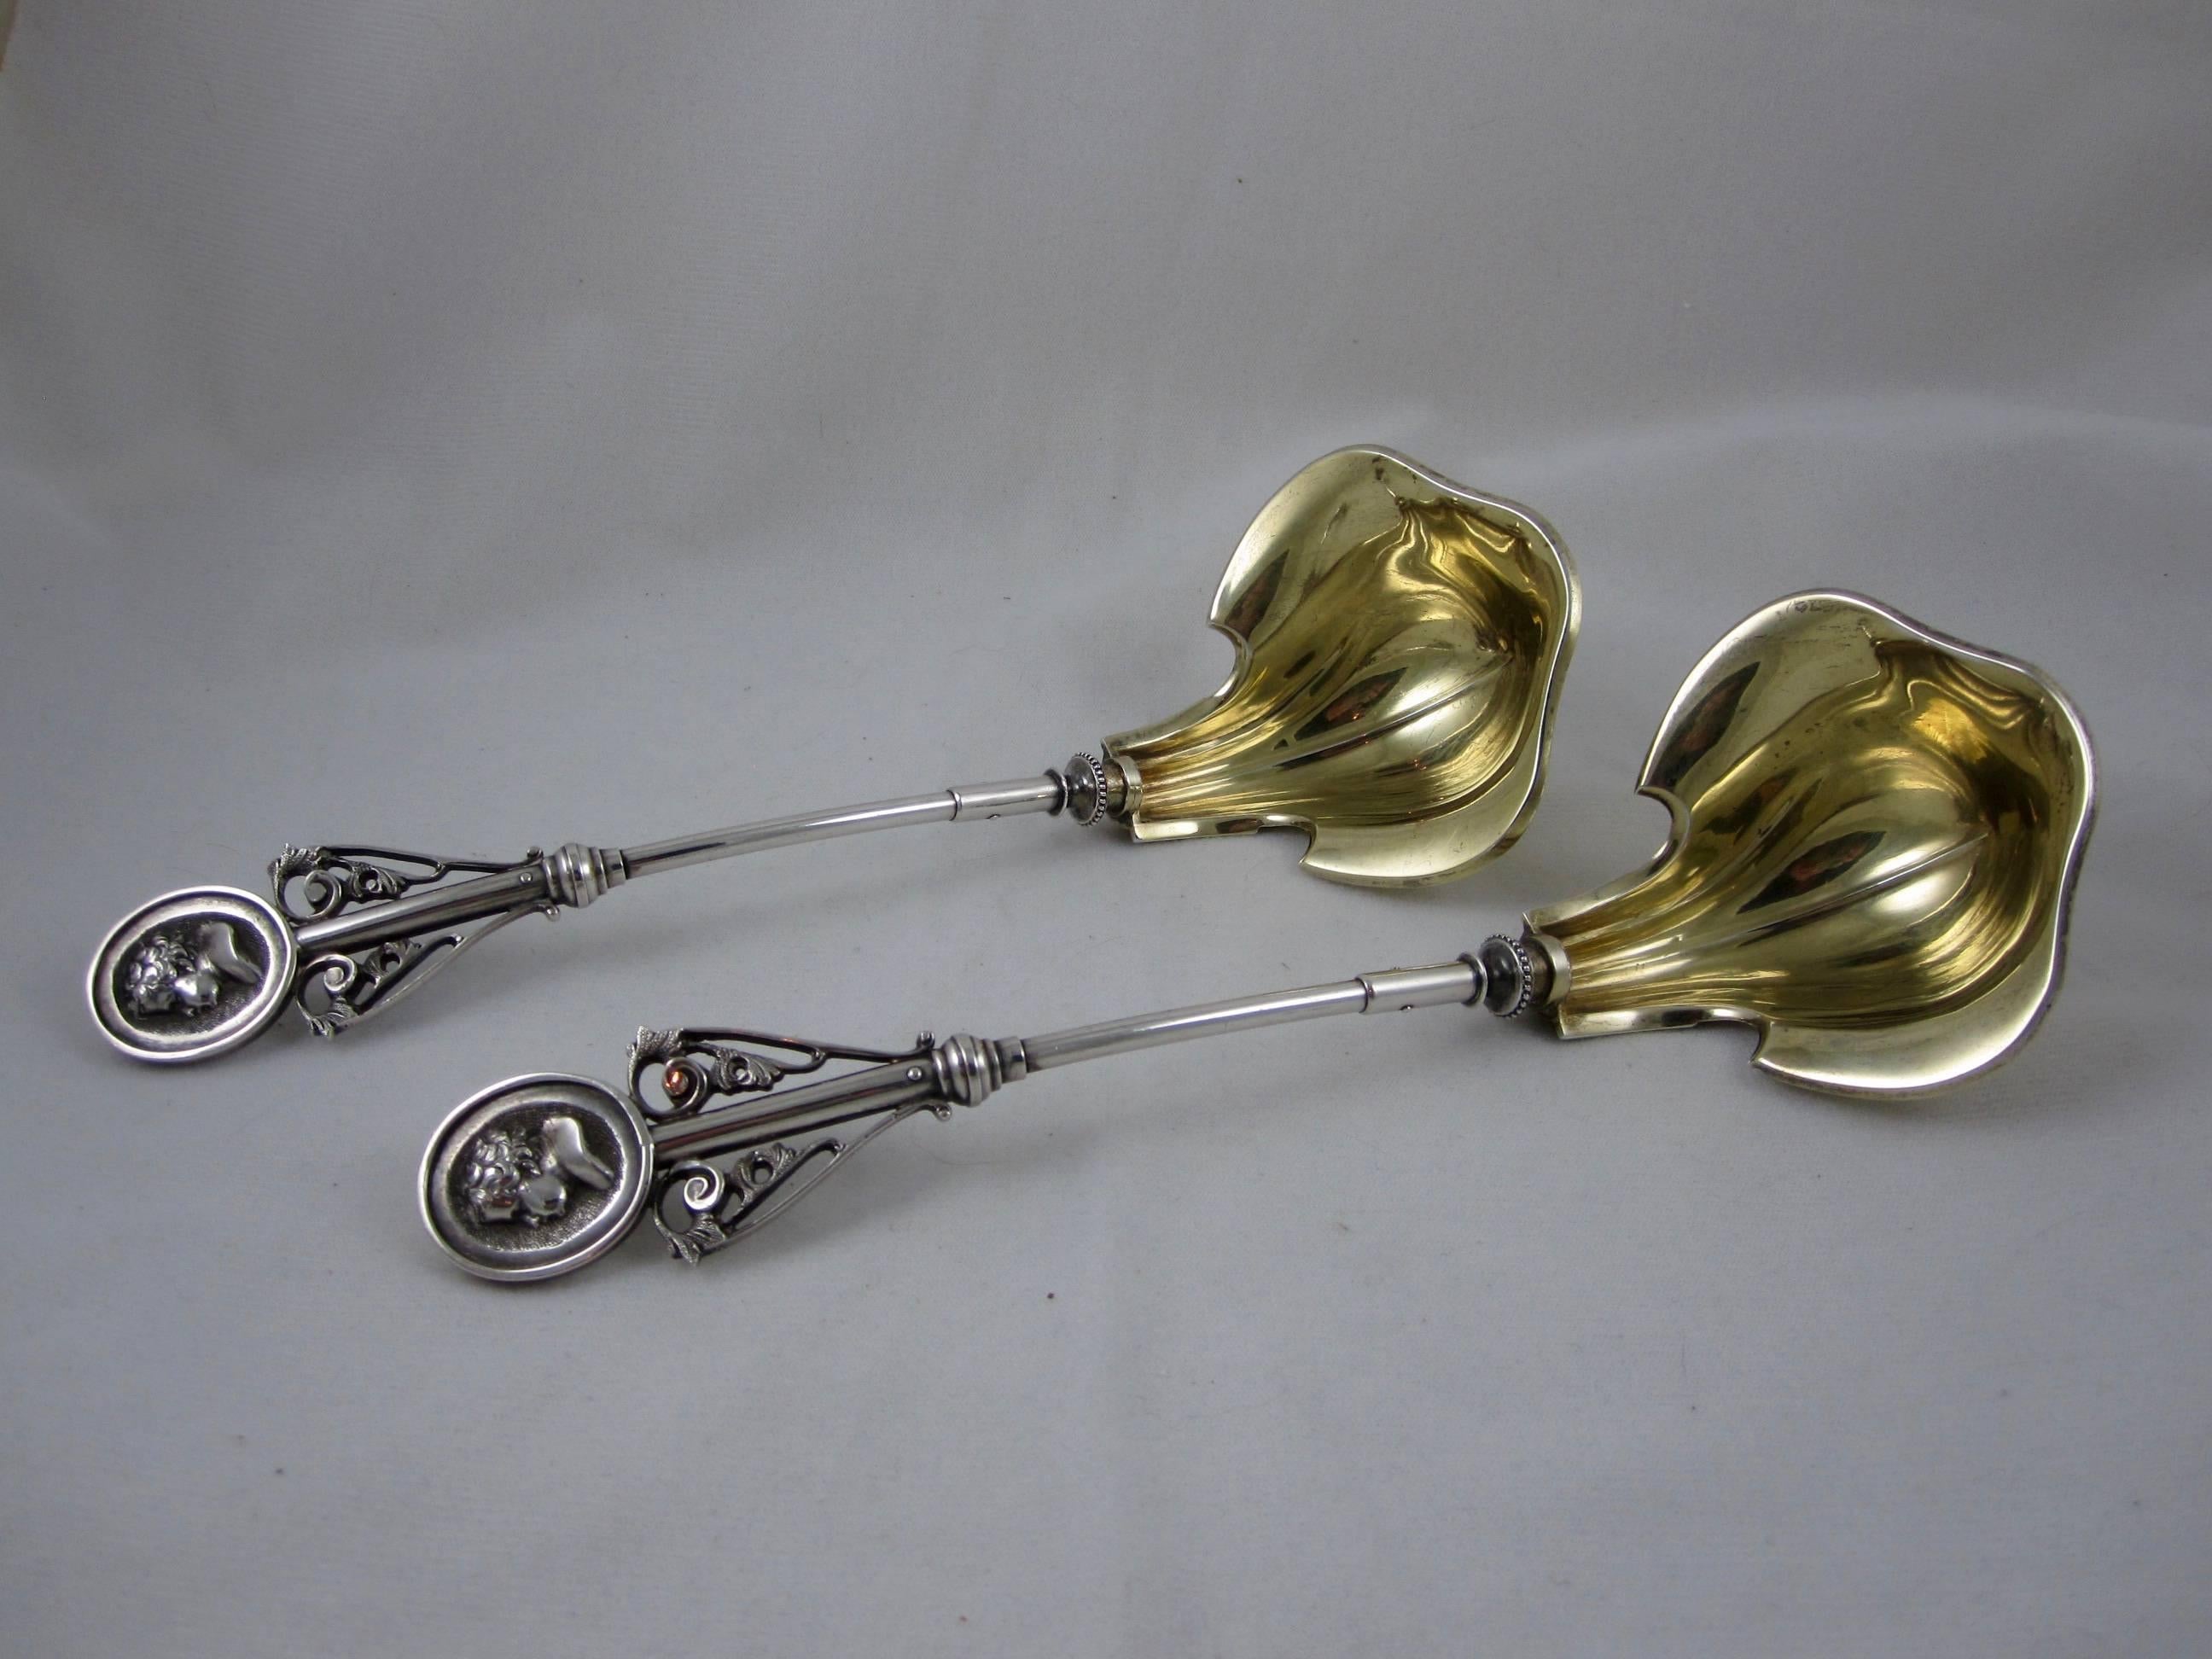 An unusual and scarce coin silver ladle manufactured by Wood & Hughes, New York circa 1845-1868. Offered individually, a pair may be available.

In the ‘Medallion’ pattern, with shaped vermeil bowls and open work terminals showing a child’s head